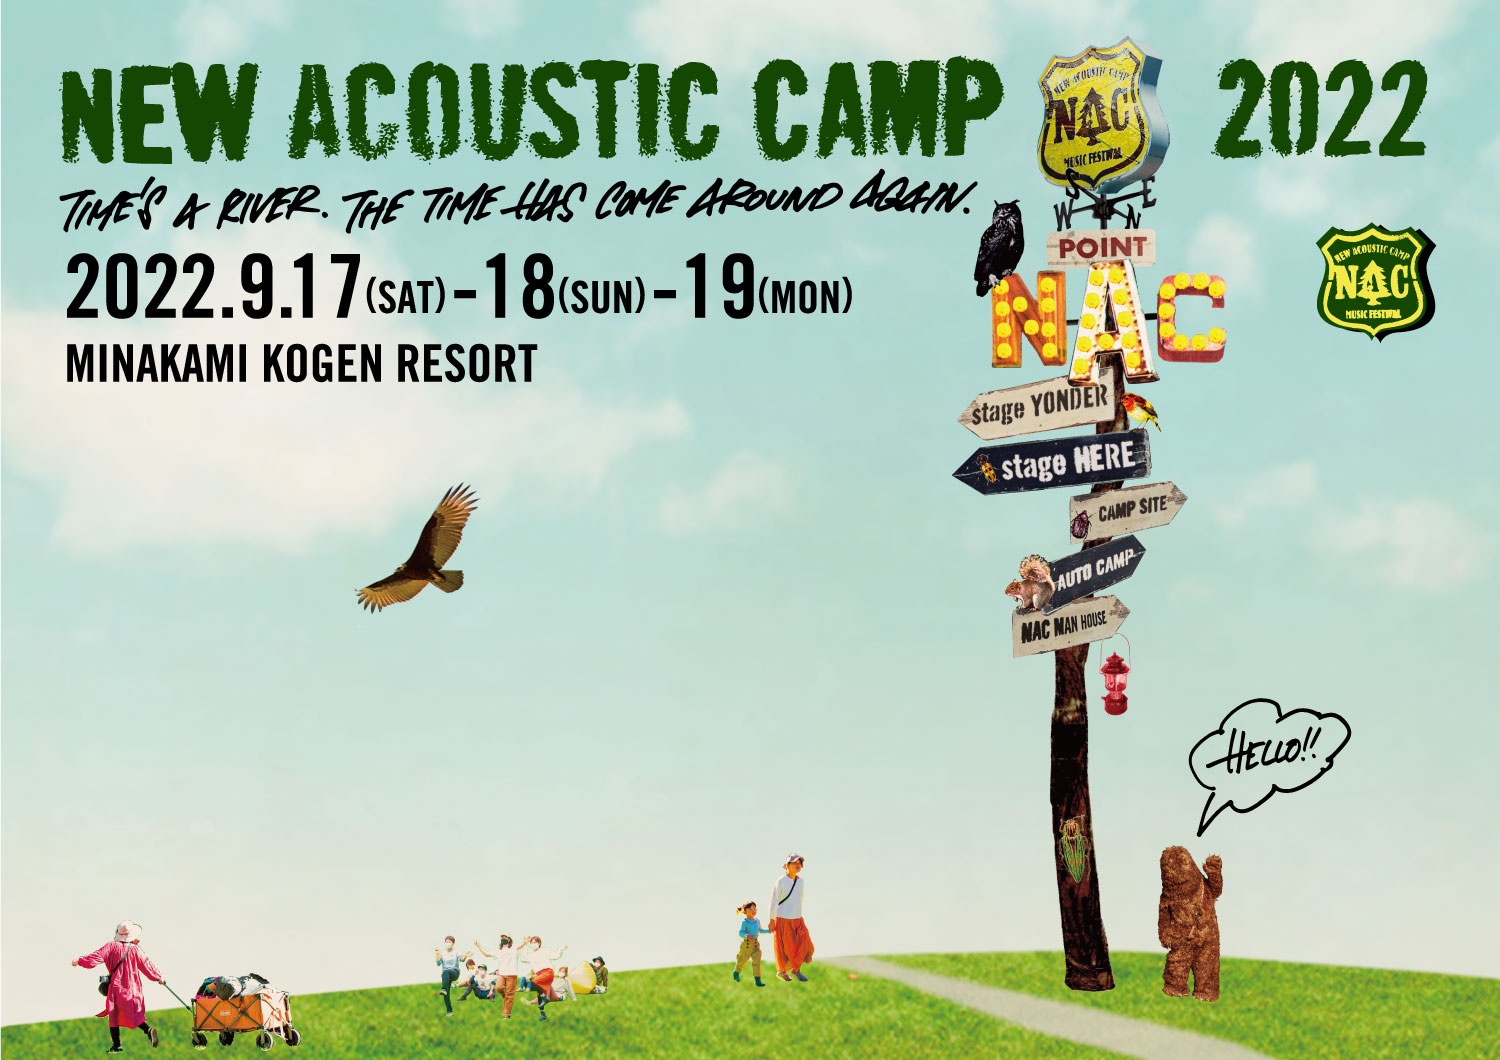 New Acoustic Camp 2022 | ニューアコ 2022